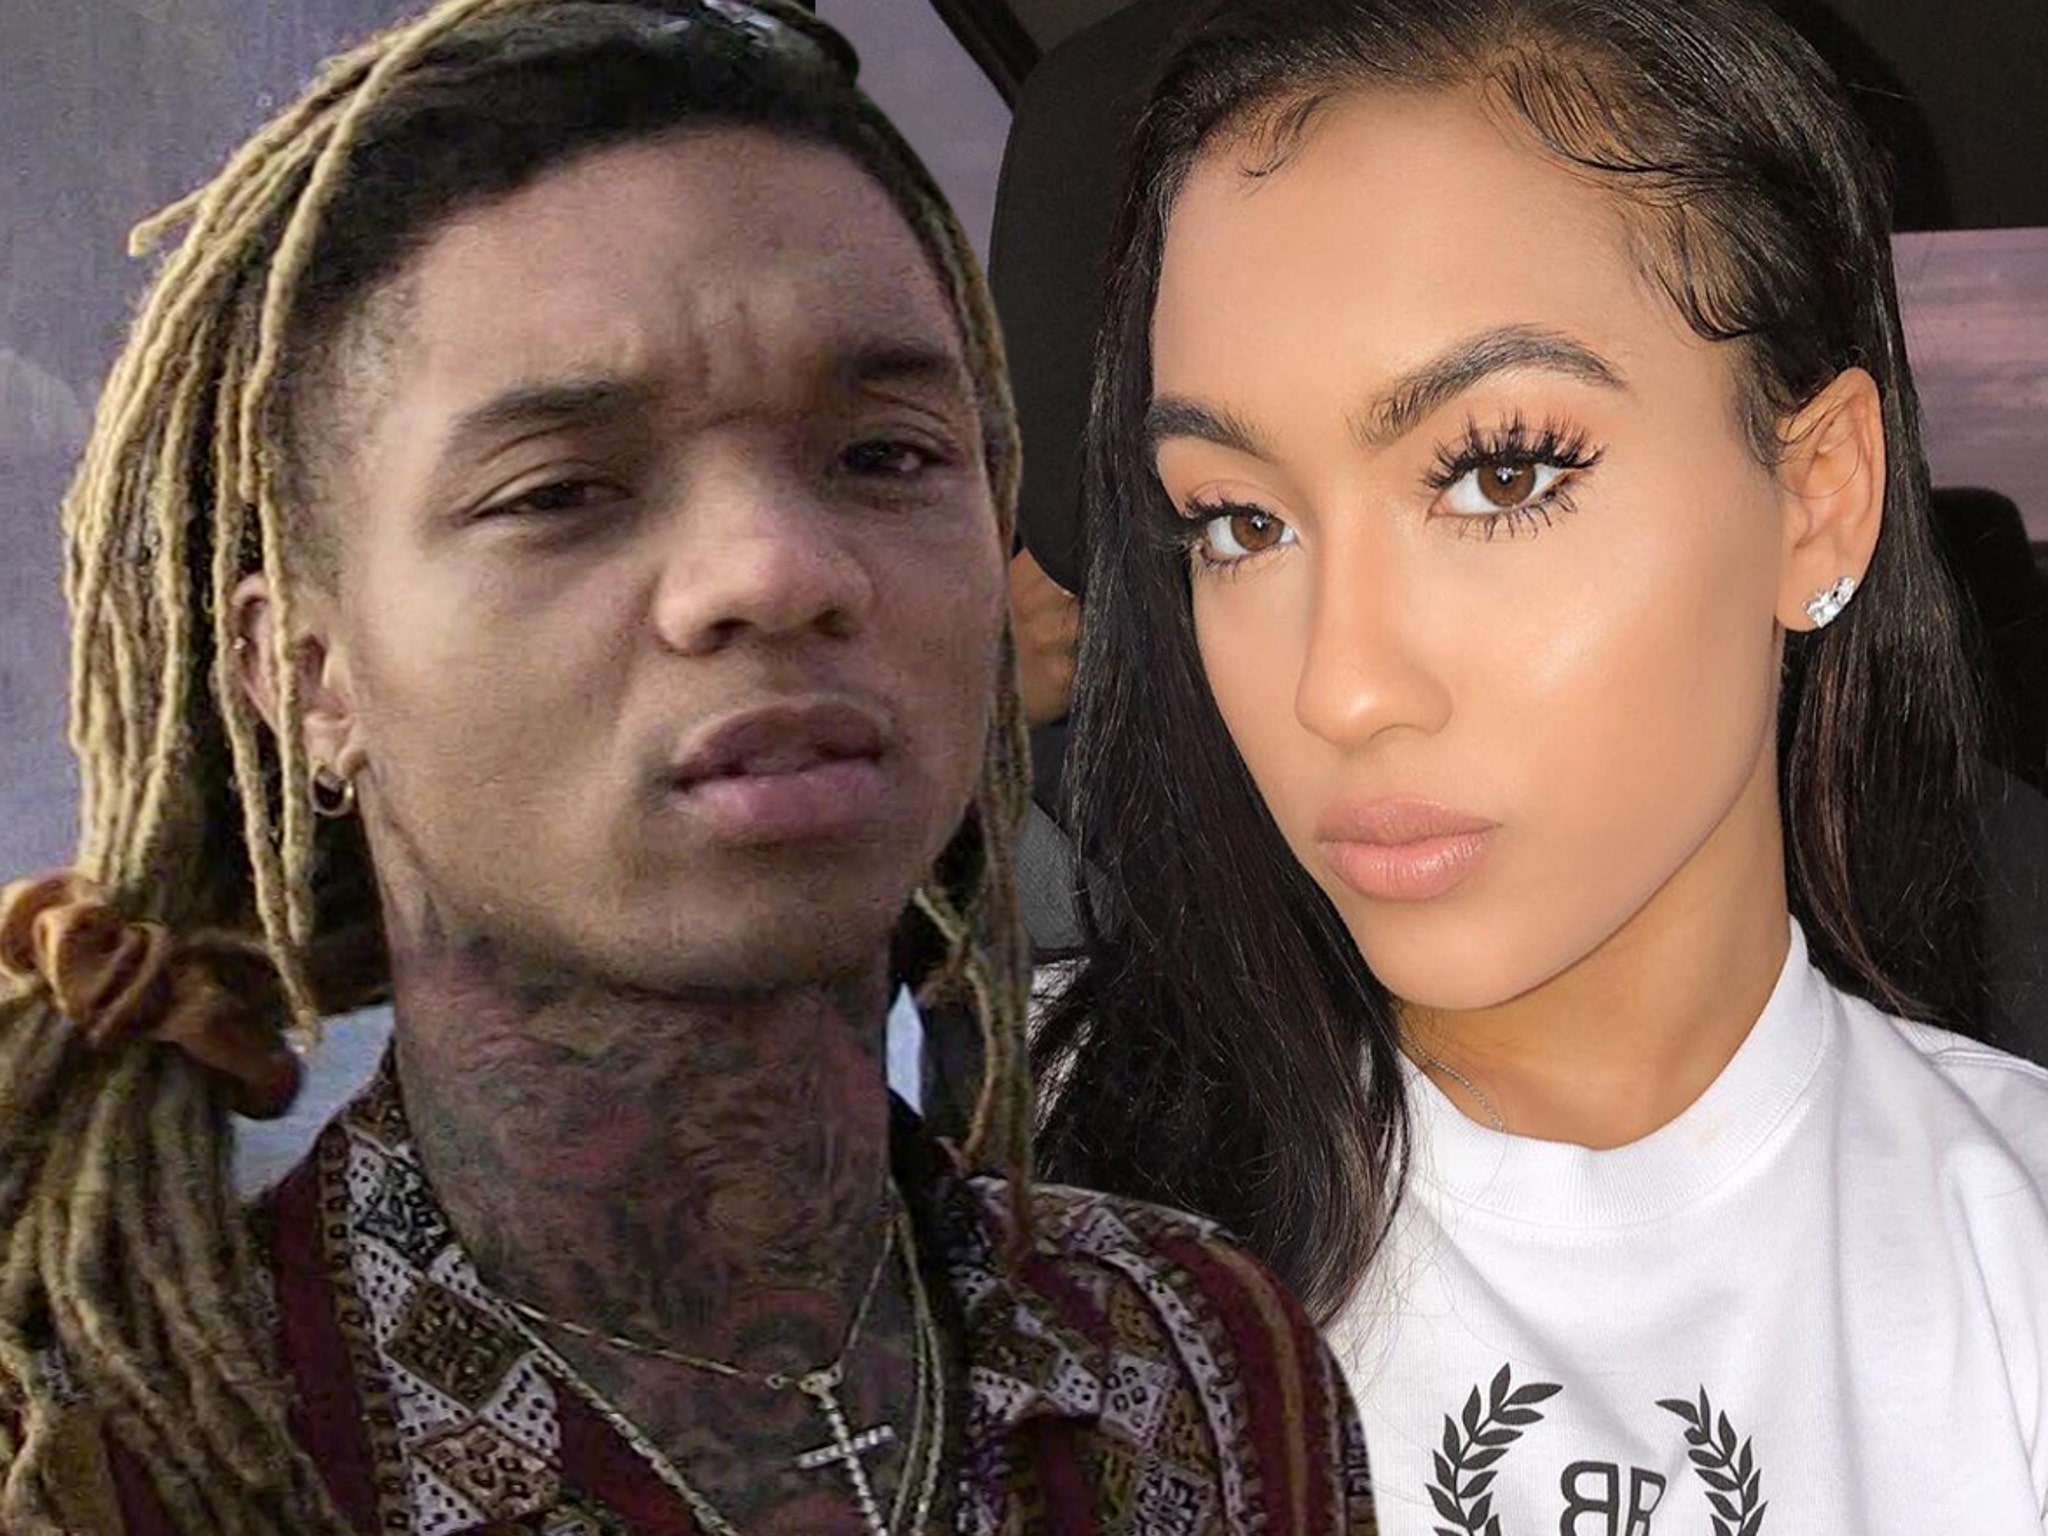 Swae Lee's Ex-Girlfriend Offers $20k to Have Him Killed, Takes It Back